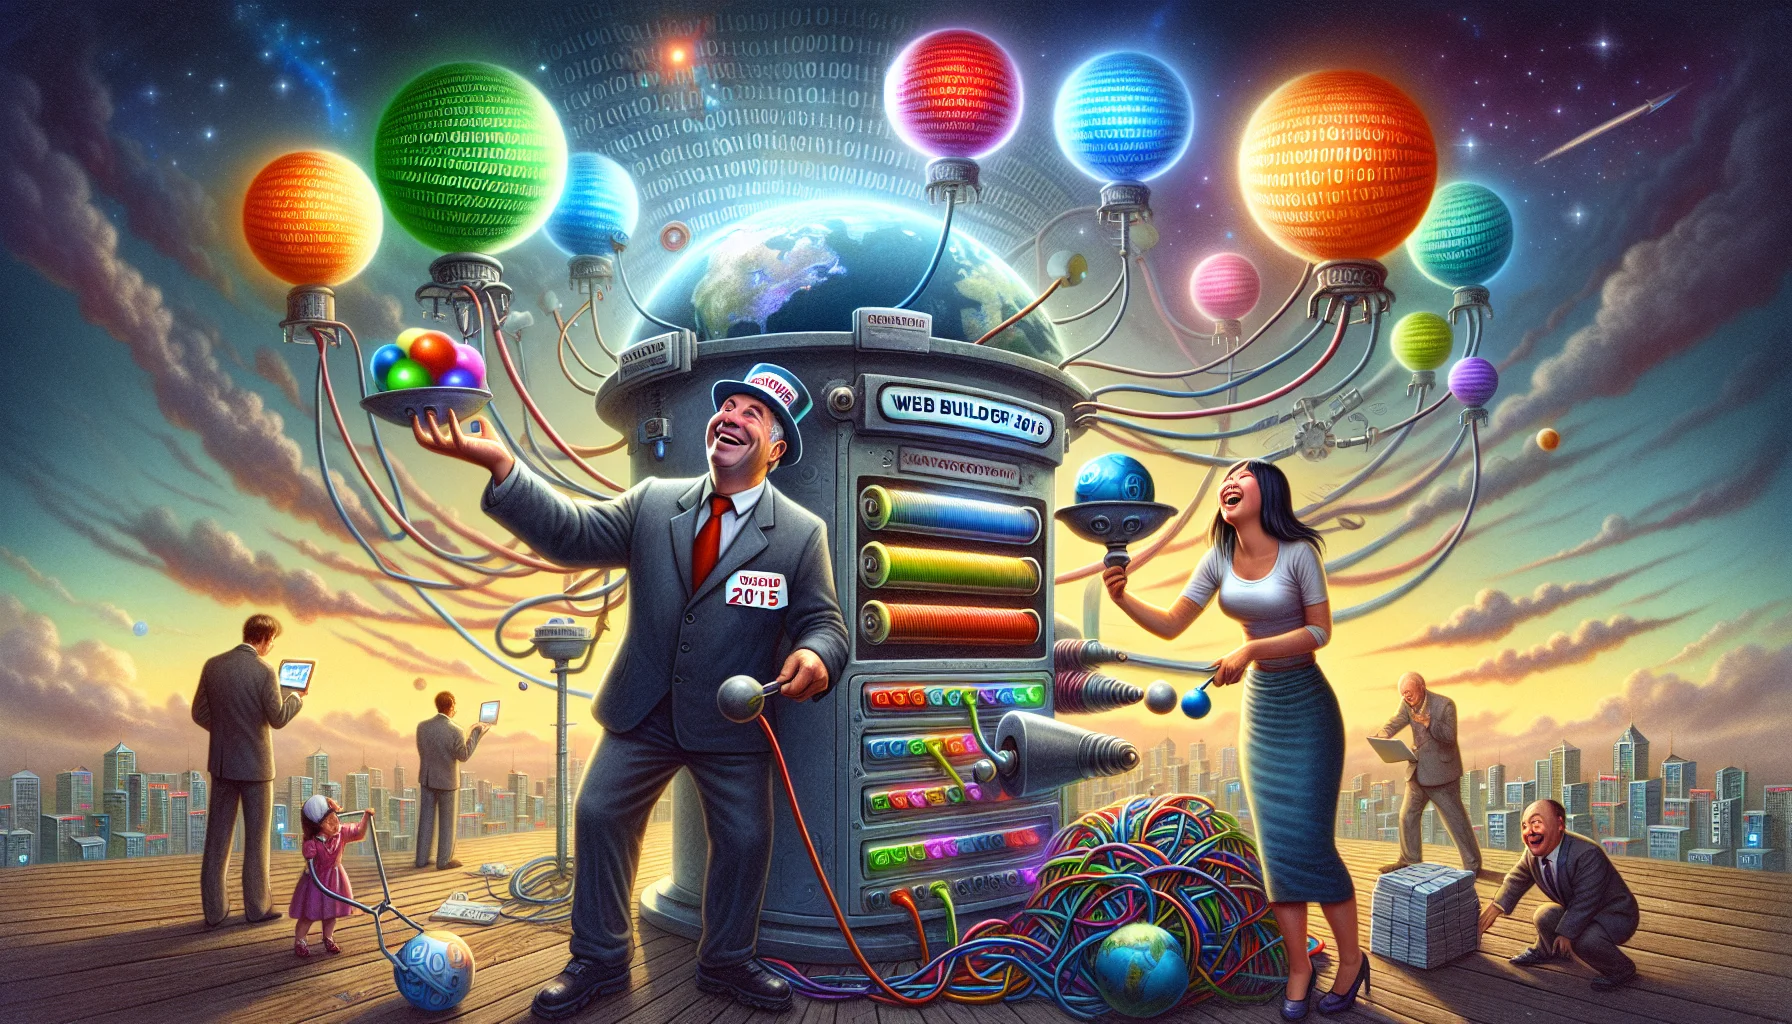 Imagine a humorous scene related to web hosting: a Caucasian man wearing a 'Web Builder of 2015' hat is juggling five vibrant globes, each representing a different website. Next to him, an Asian woman is laughing while adjusting a large lever labeled 'Bandwidth' on a whimsical machine with wires and blinking lights. In the background, a fantastical cityscape made of server towers is visible under a sky streaked with binary code.